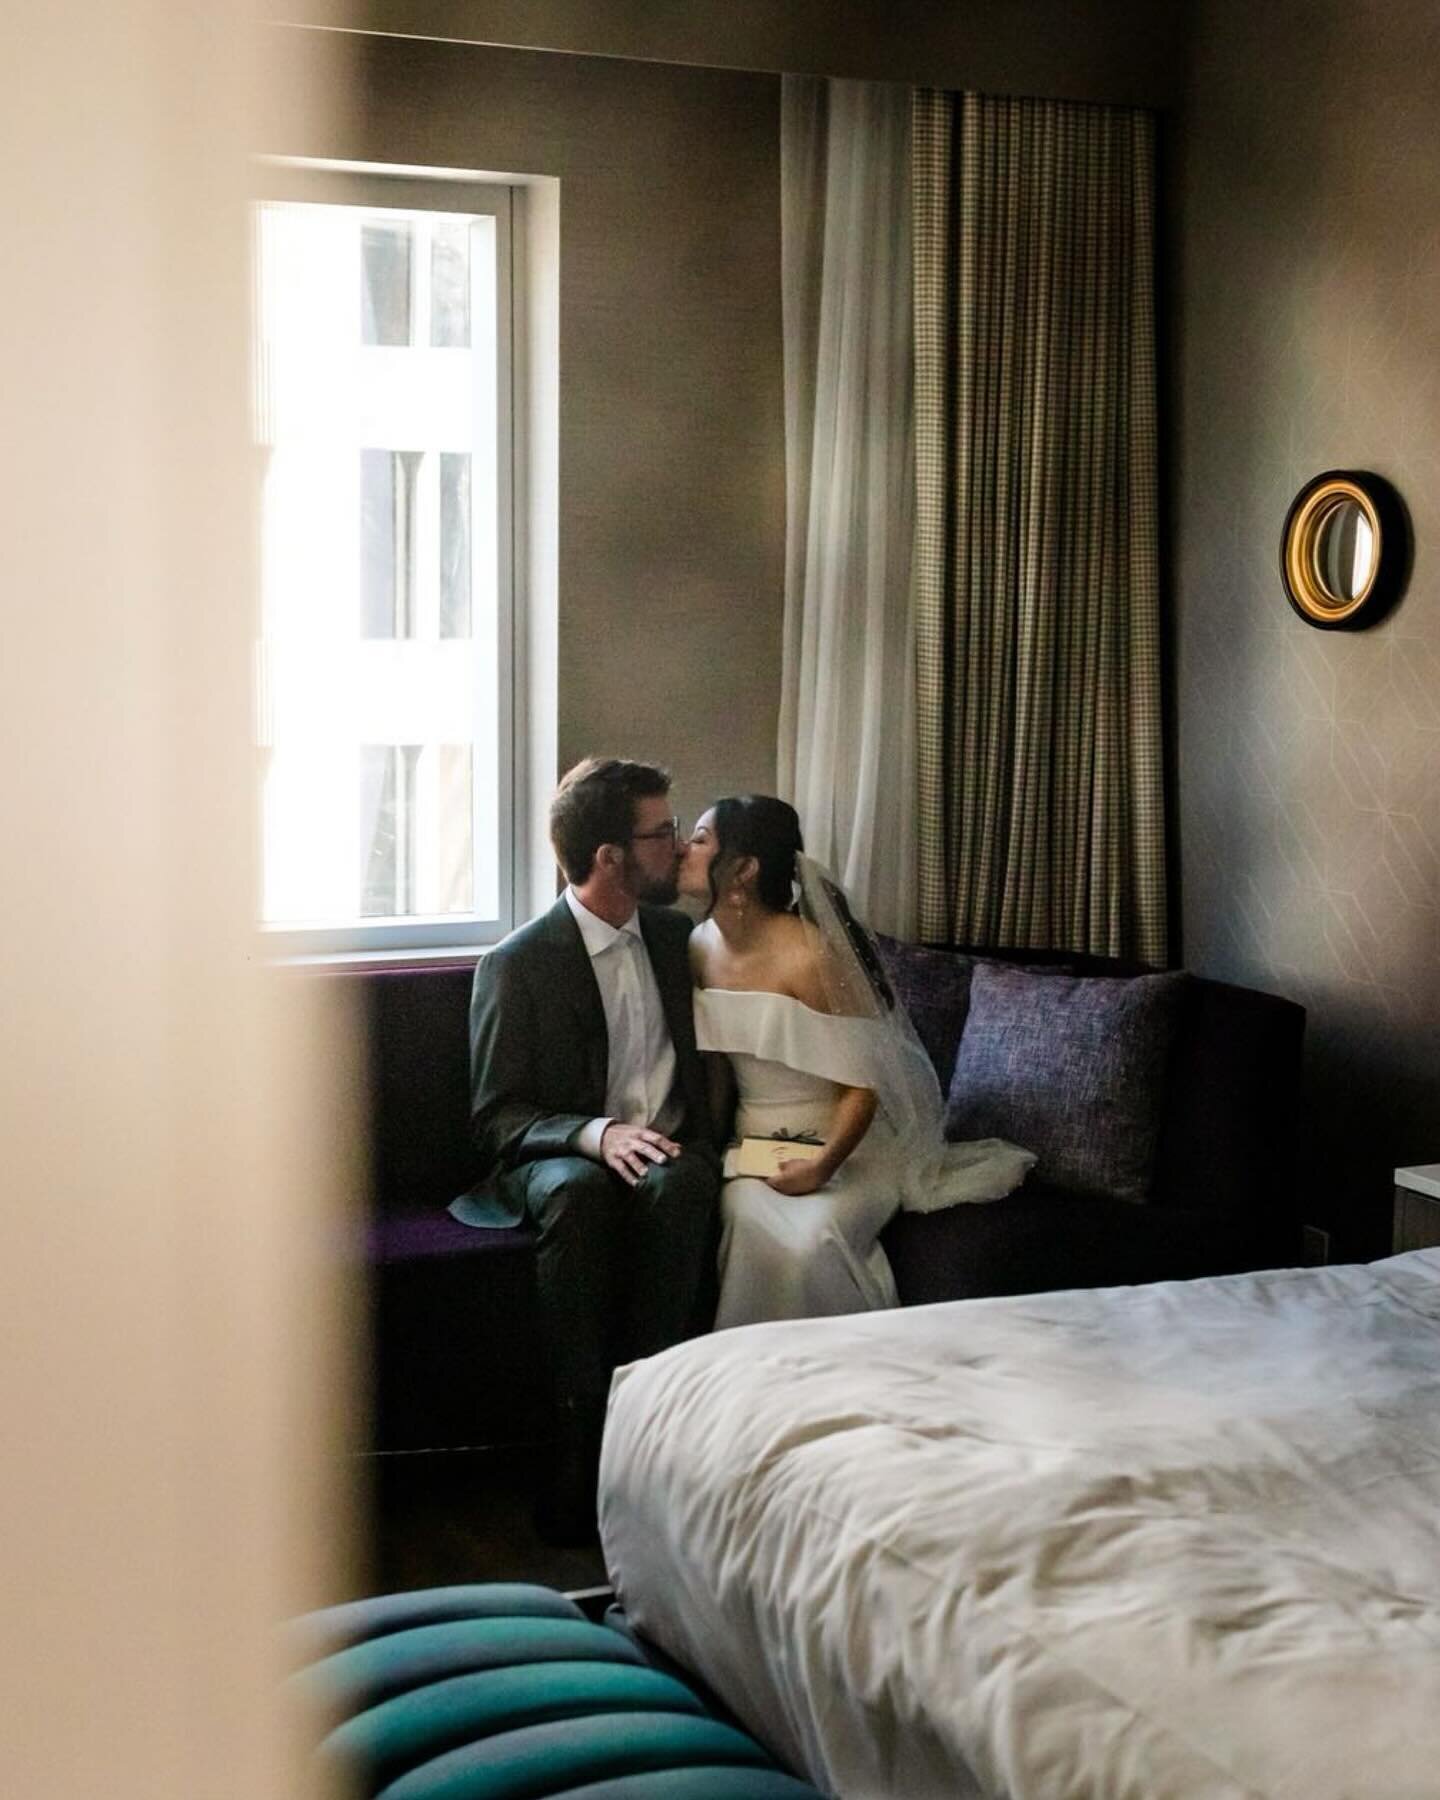 The perfect combo of Sunday morning brunch + private hotel room vows ✨ A delightful wedding day with Hazel, Curtis + all their fave people!
.
.
.
#calgaryweddingphotographer #yycweddings #yycweddingphotographer #albertaweddingphotographer #calgarypho